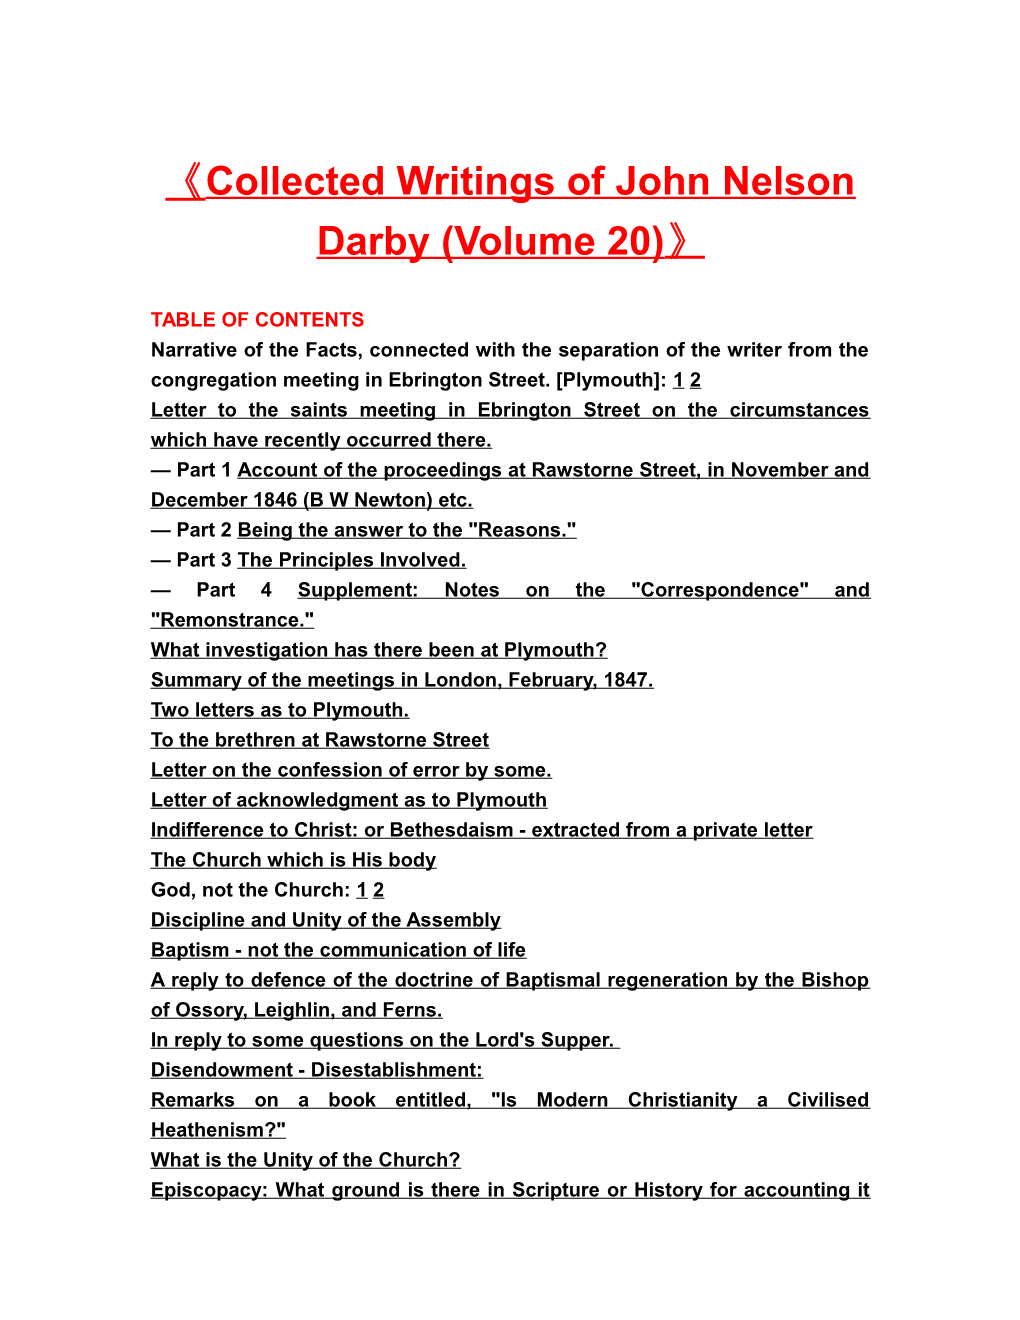 Collected Writings of John Nelson Darby (Volume 20)